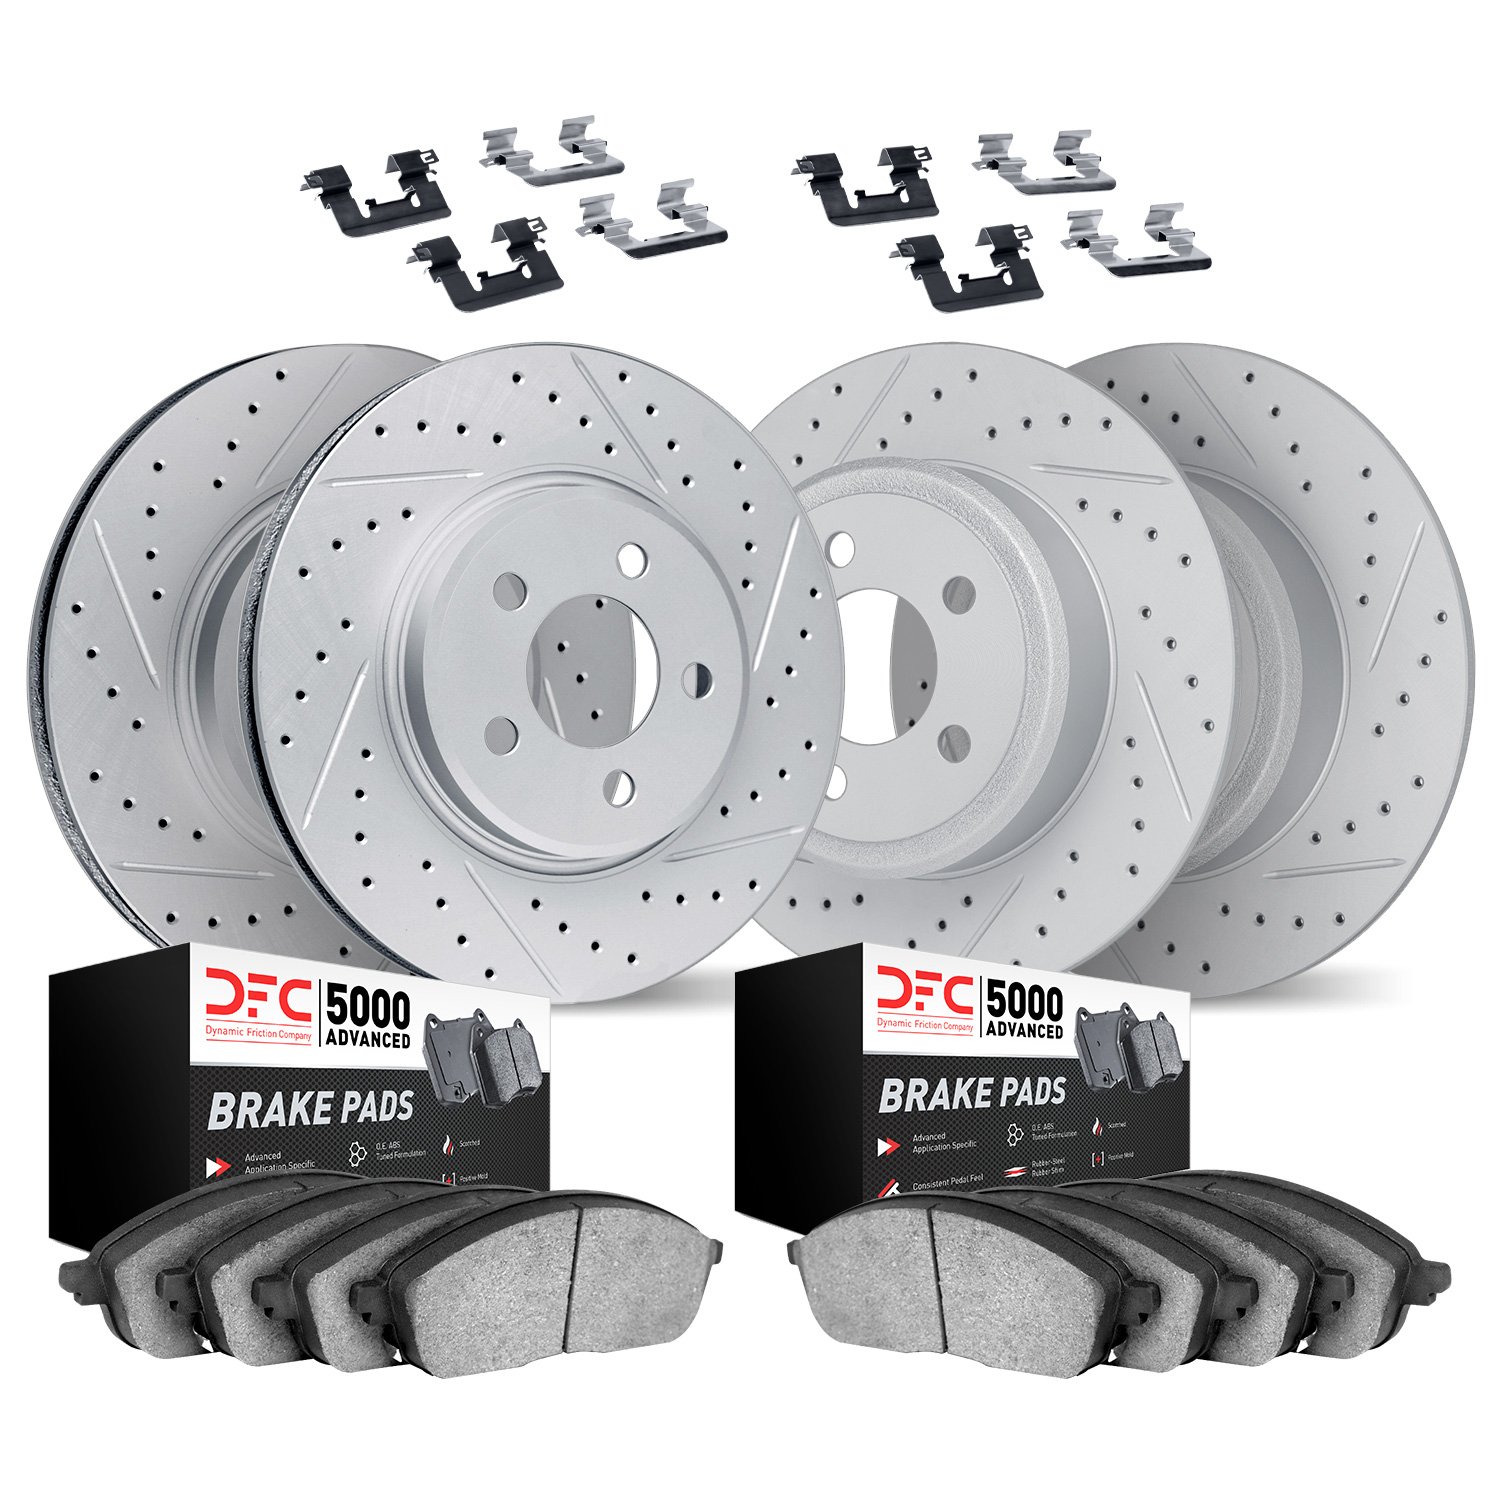 2514-27016 Geoperformance Drilled/Slotted Rotors w/5000 Advanced Brake Pads Kit & Hardware, Fits Select Volvo, Position: Front a